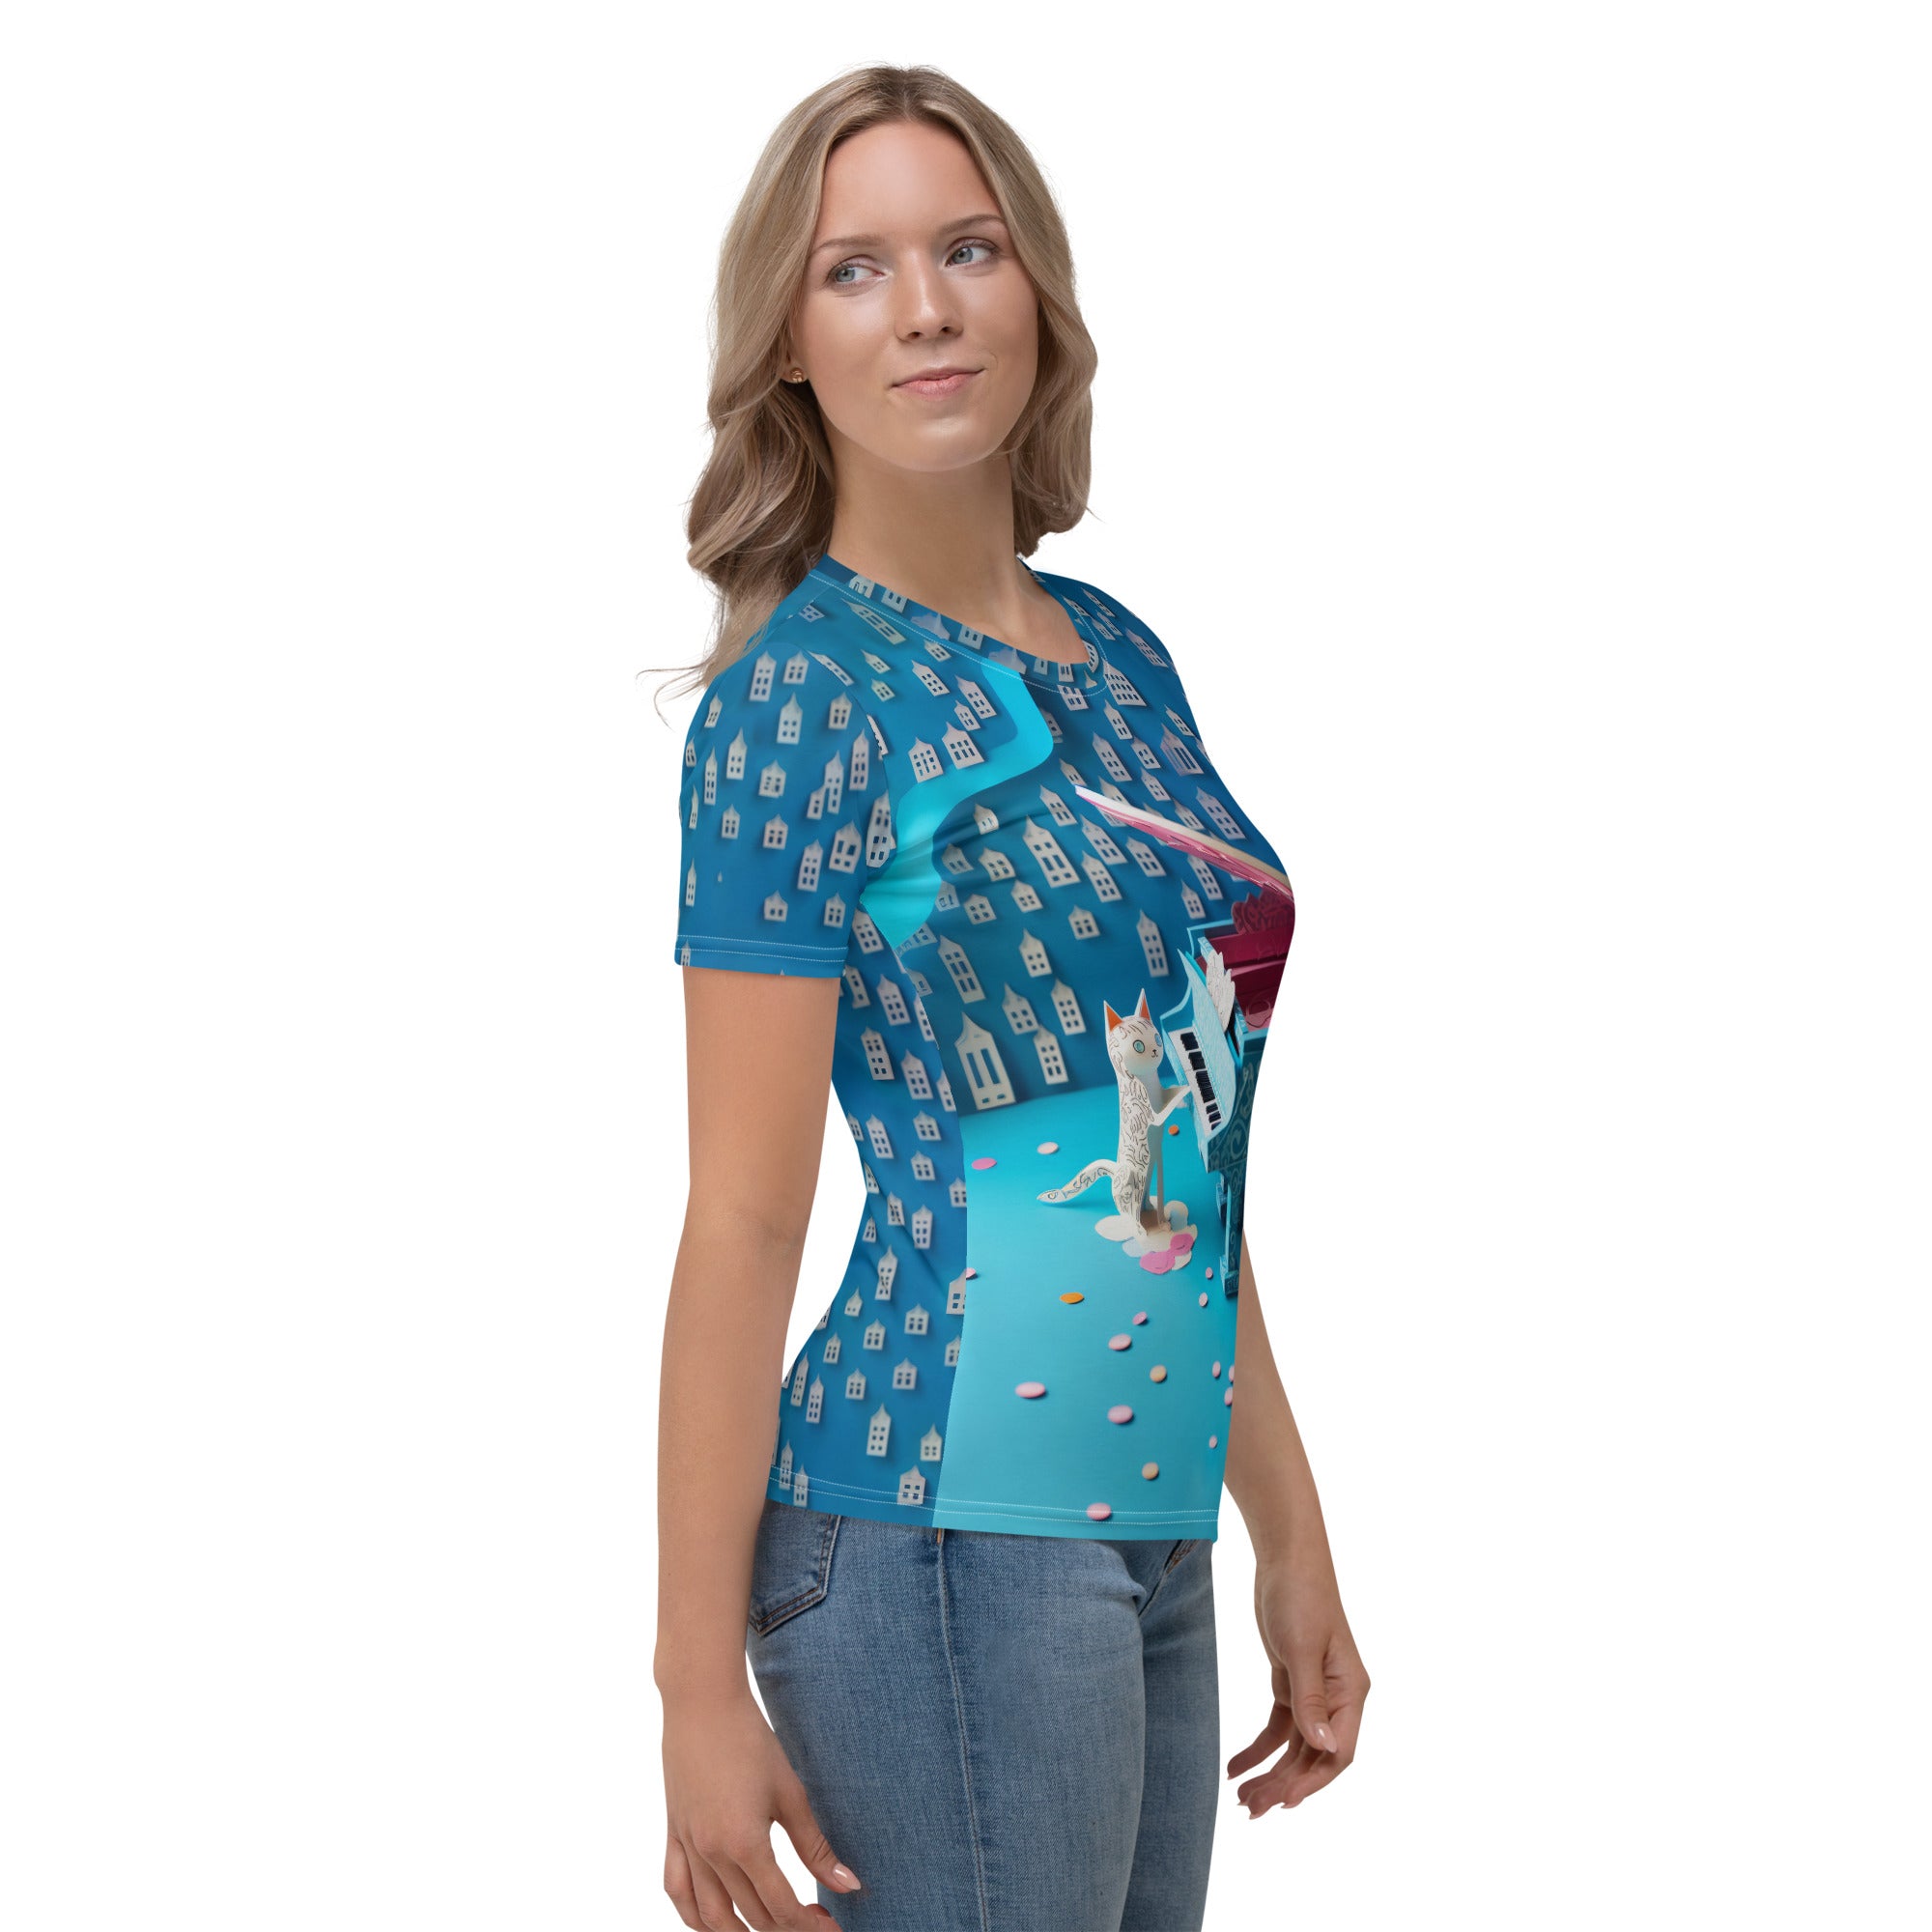 Women's T-shirt with graceful cat and moonlit sky design.